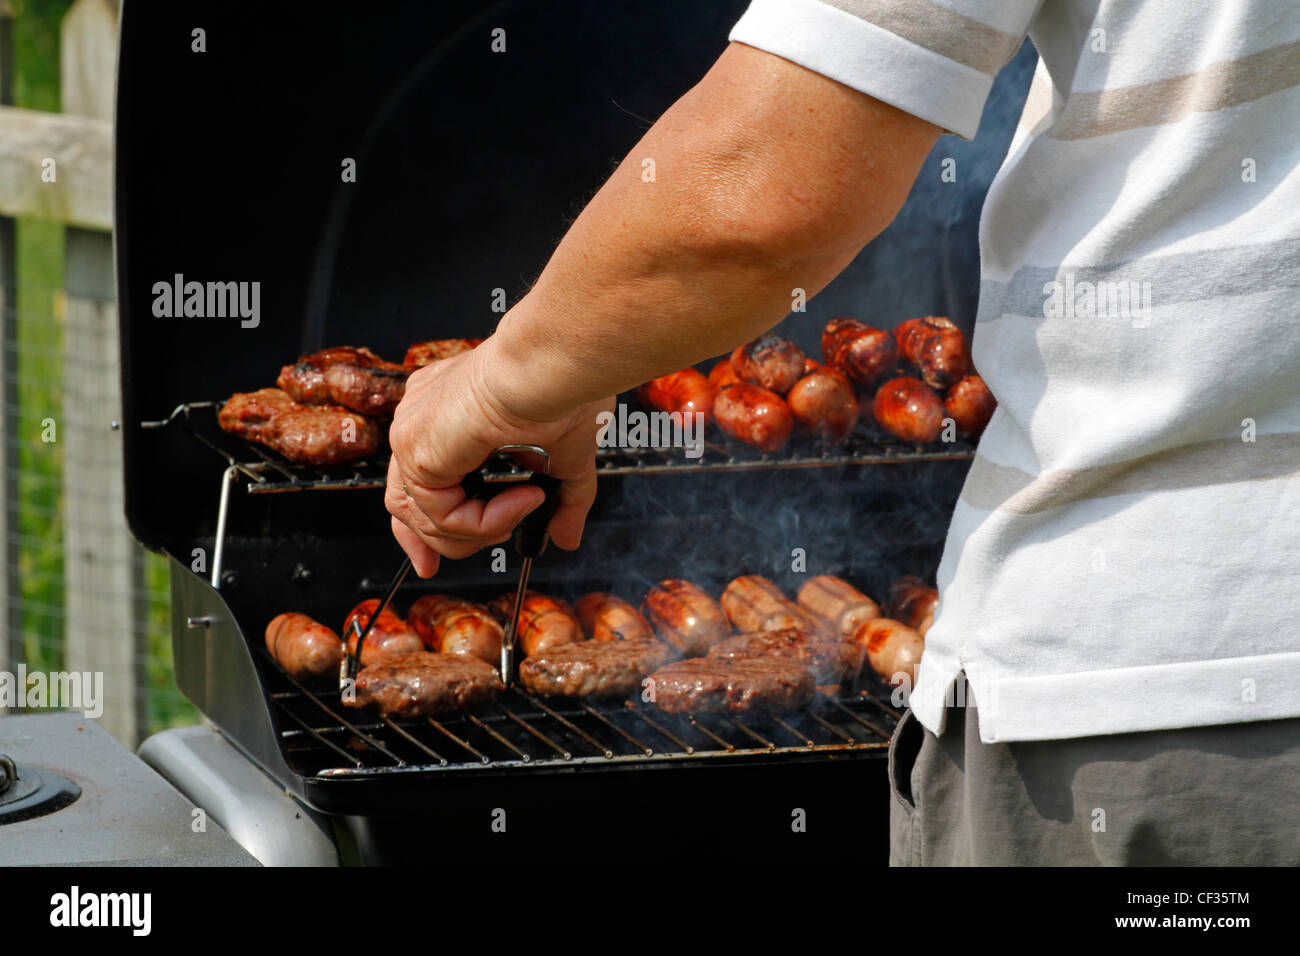 A man cooking sausages and burgers on a barbecue. Stock Photo